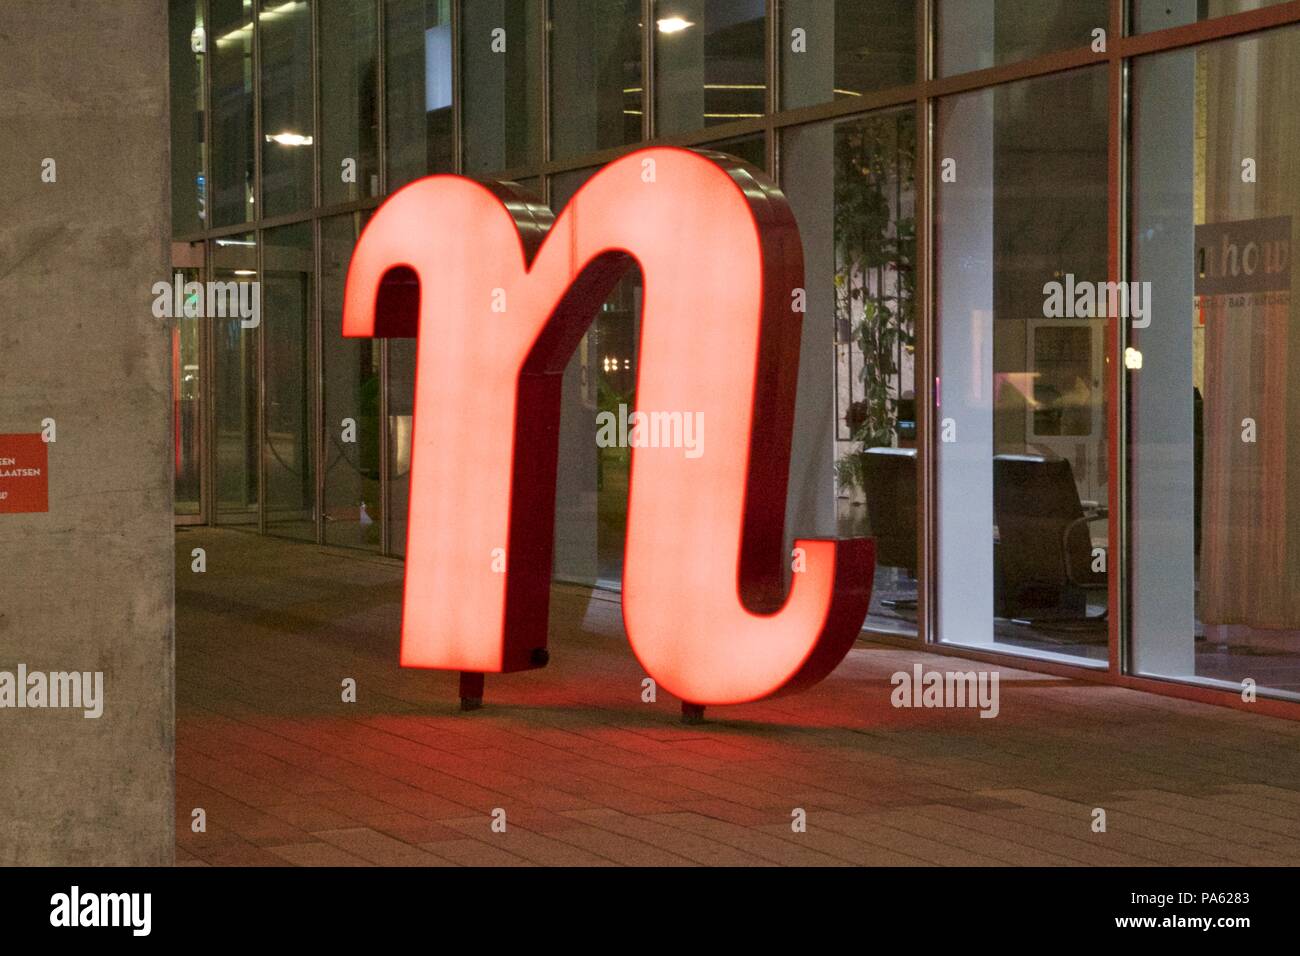 A red n statue sign outside nhow Rotterdam, part of NH Hotels Stock Photo